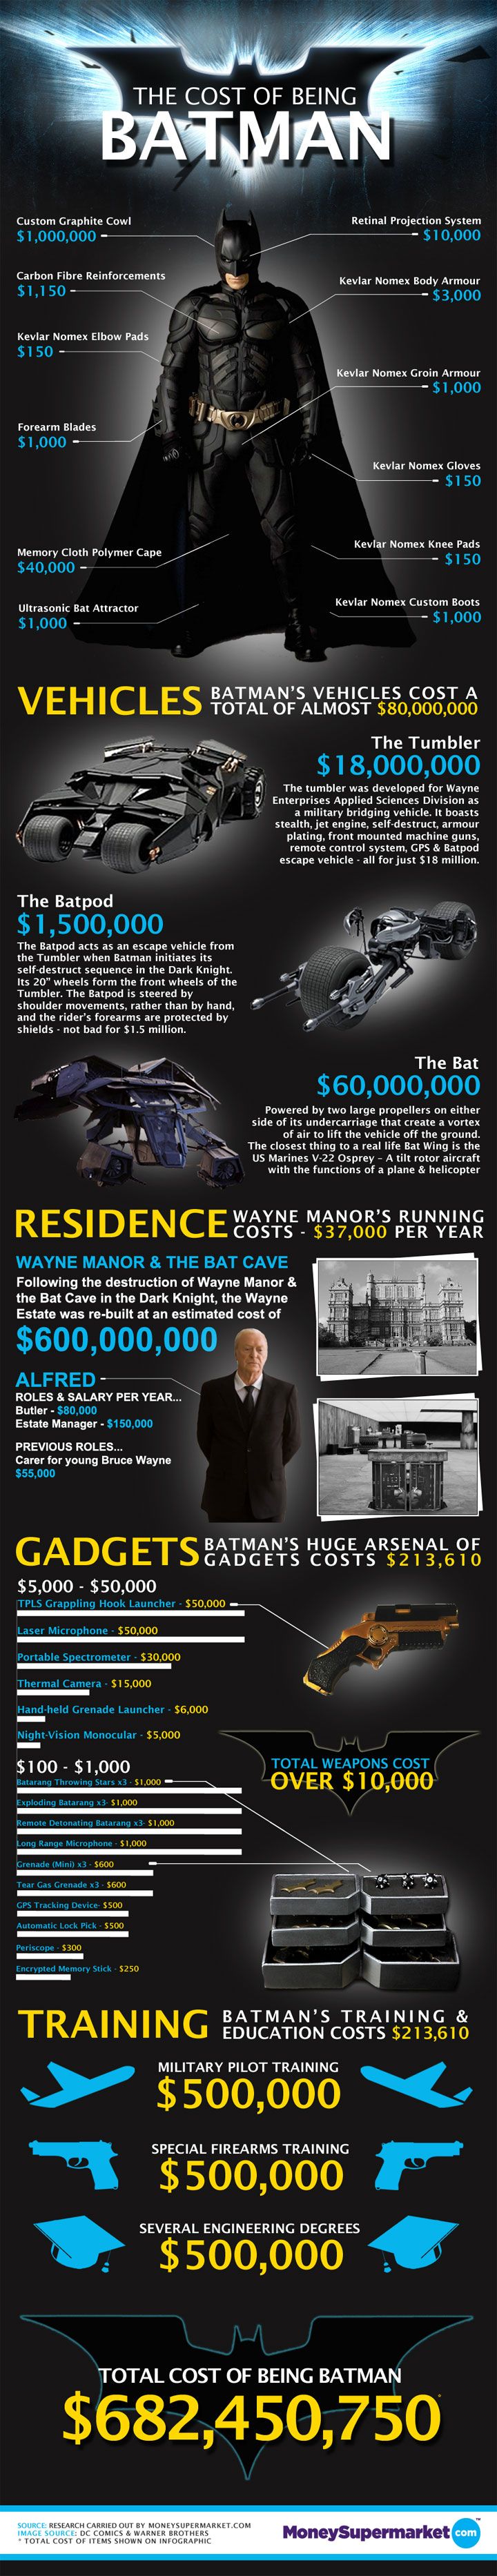 cost-of-being-batman-infographic